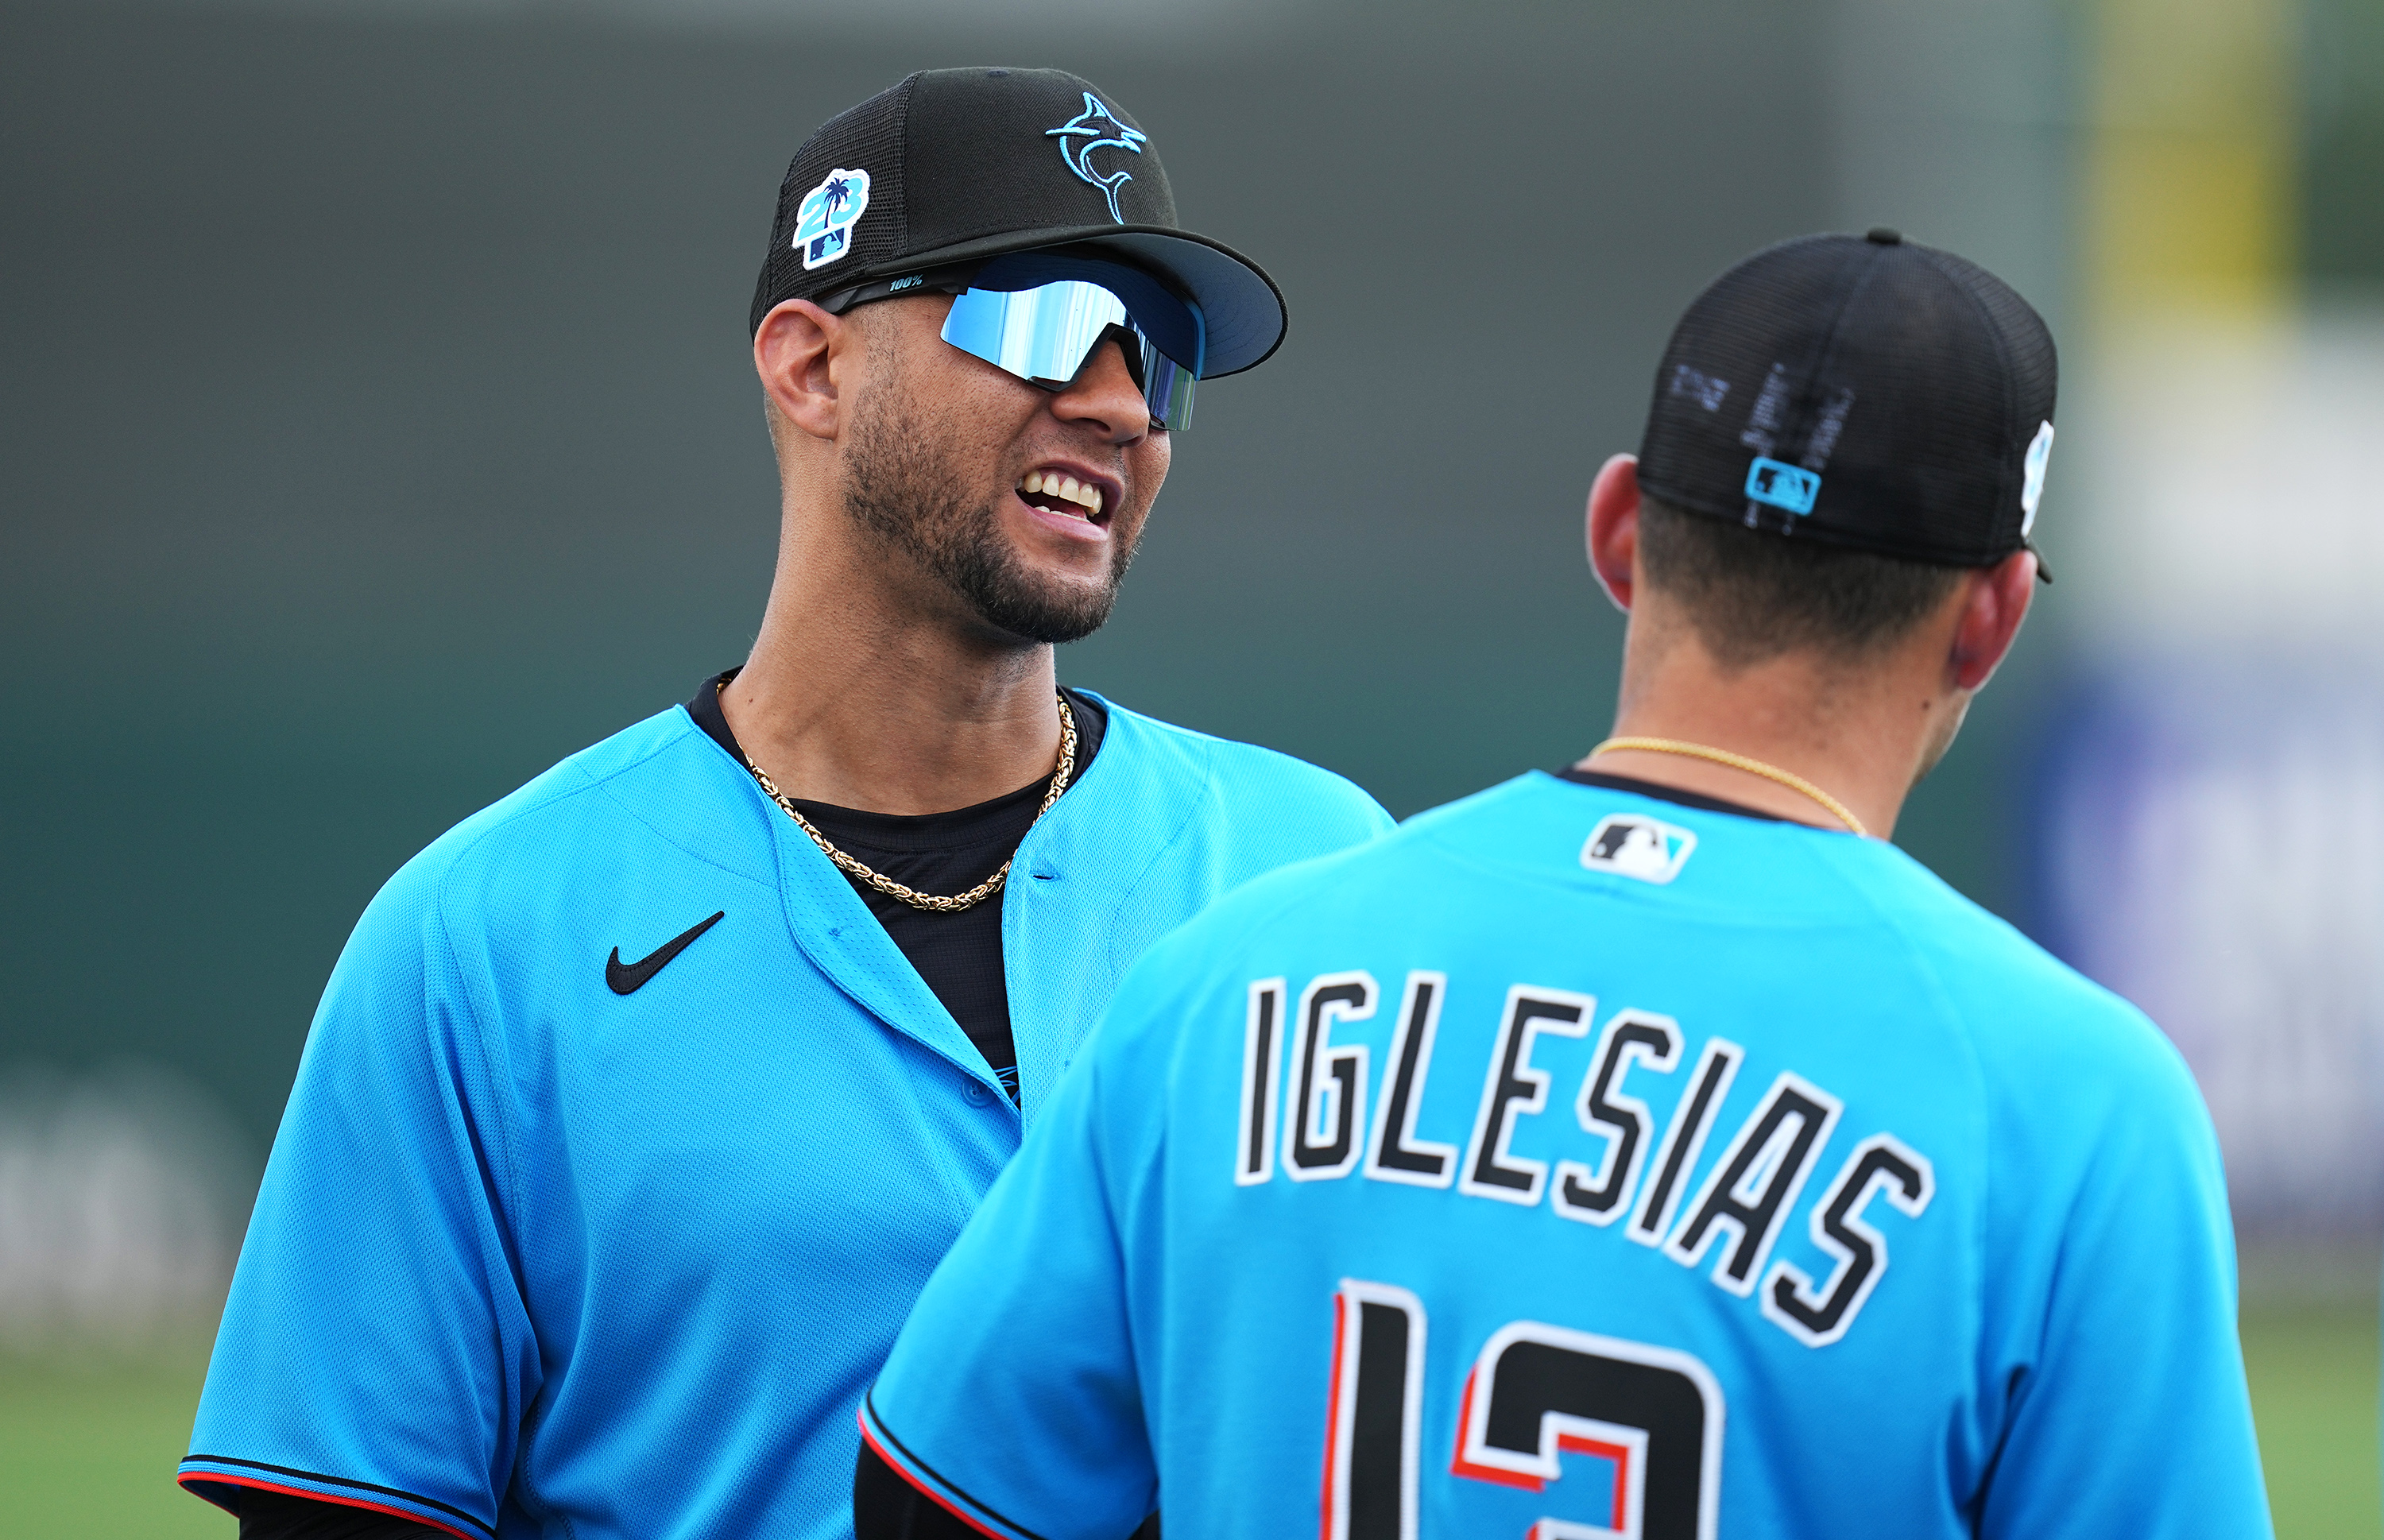 Miami Marlins designated hitter Yuli Gurriel (97) talks with Miami Marlins shortstop Jose Iglesias (13) before the game against the New York Mets at Roger Dean Stadium.